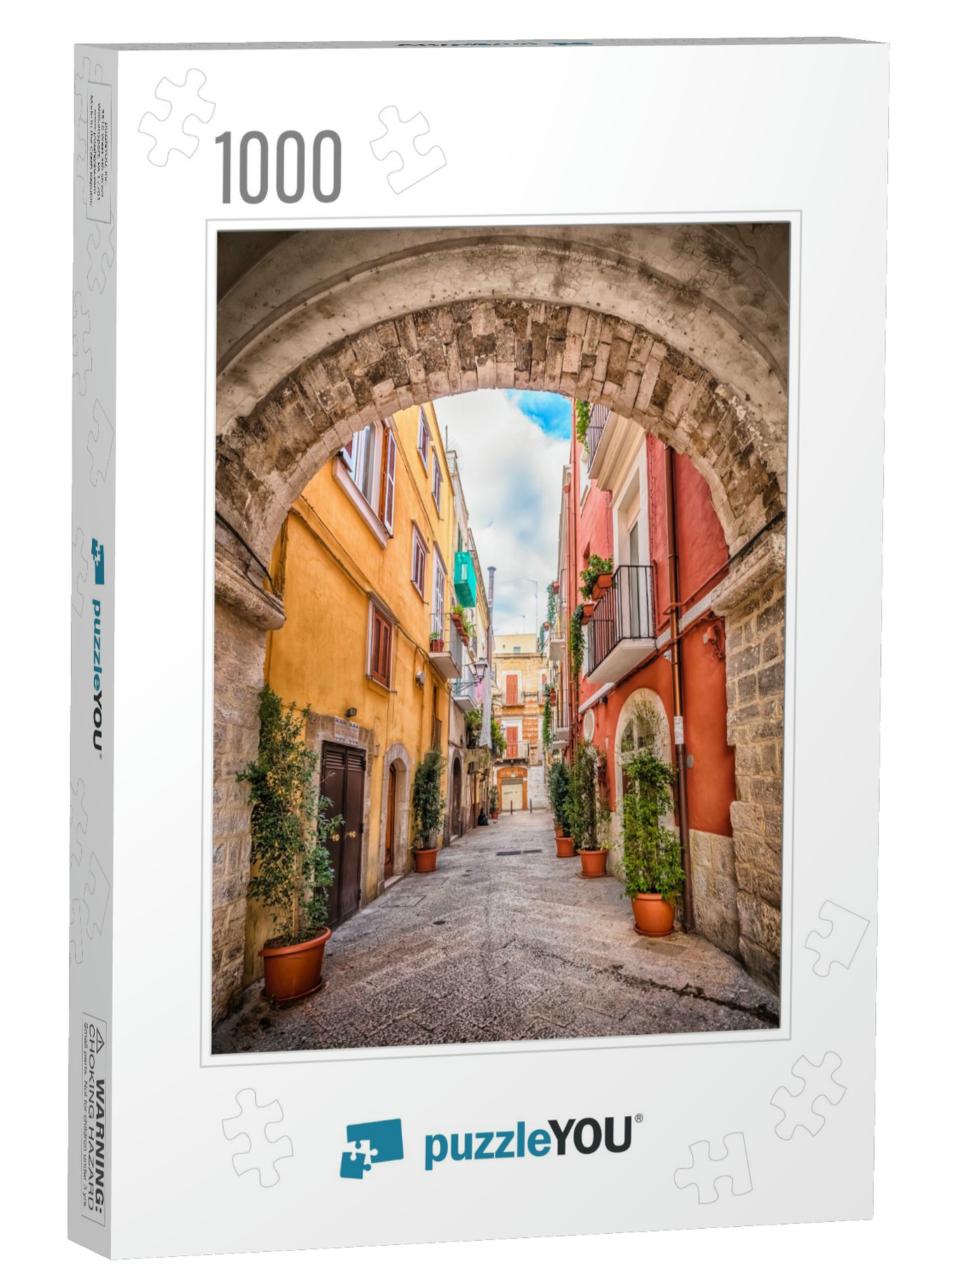 Alleyway in Old White Town Bari, Puglia, South Italy... Jigsaw Puzzle with 1000 pieces